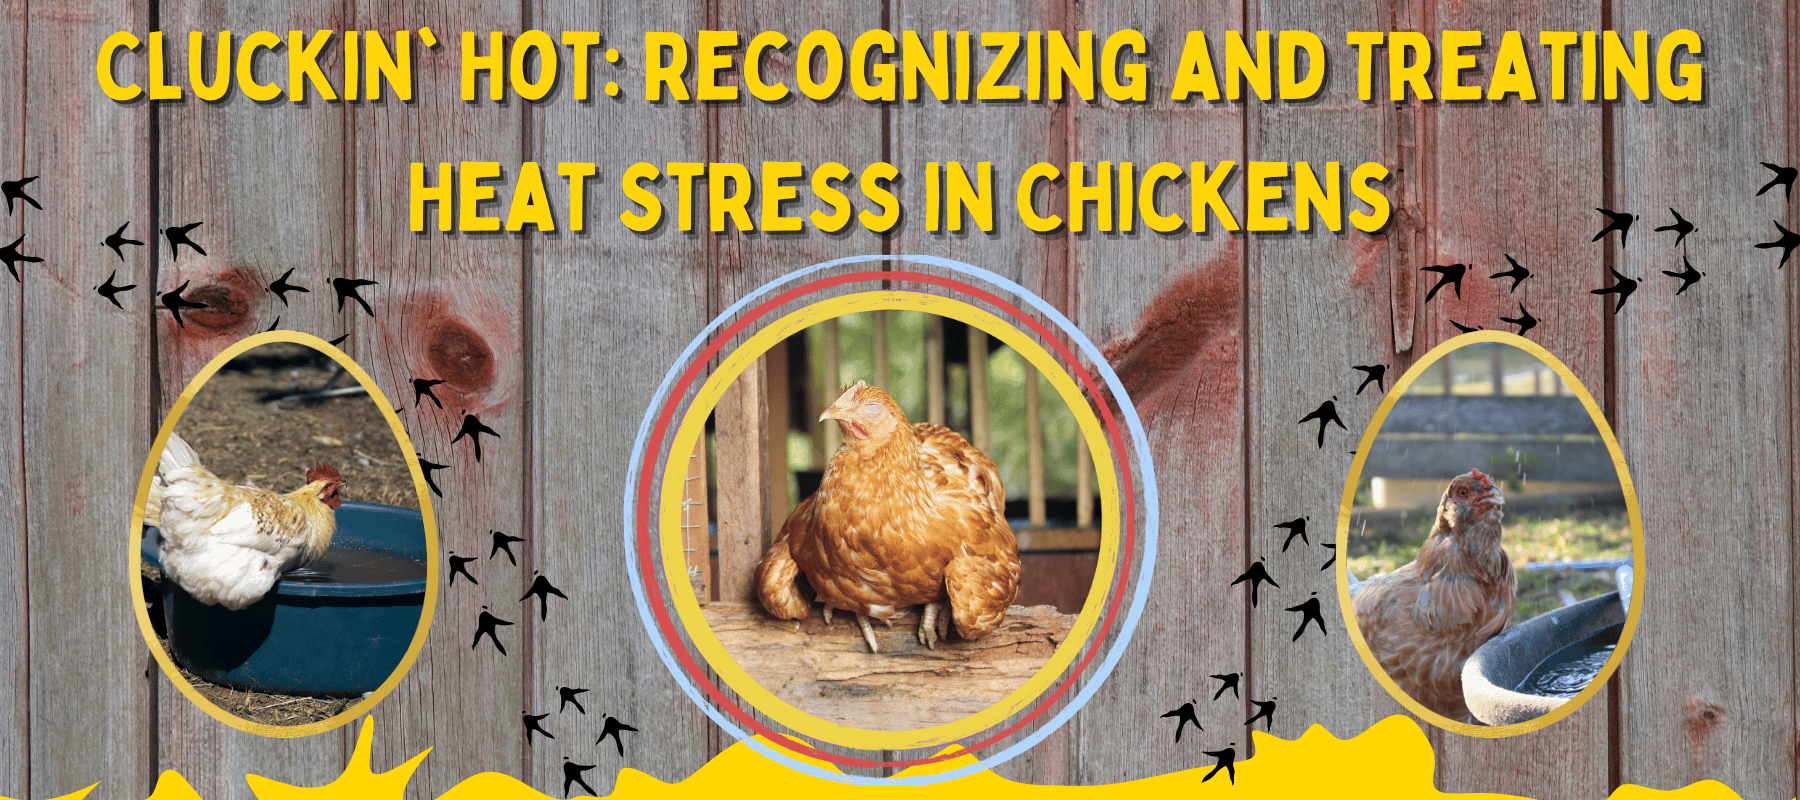 Cluckin' Hot: Recognizing and Treating Heat Stress in Chickens